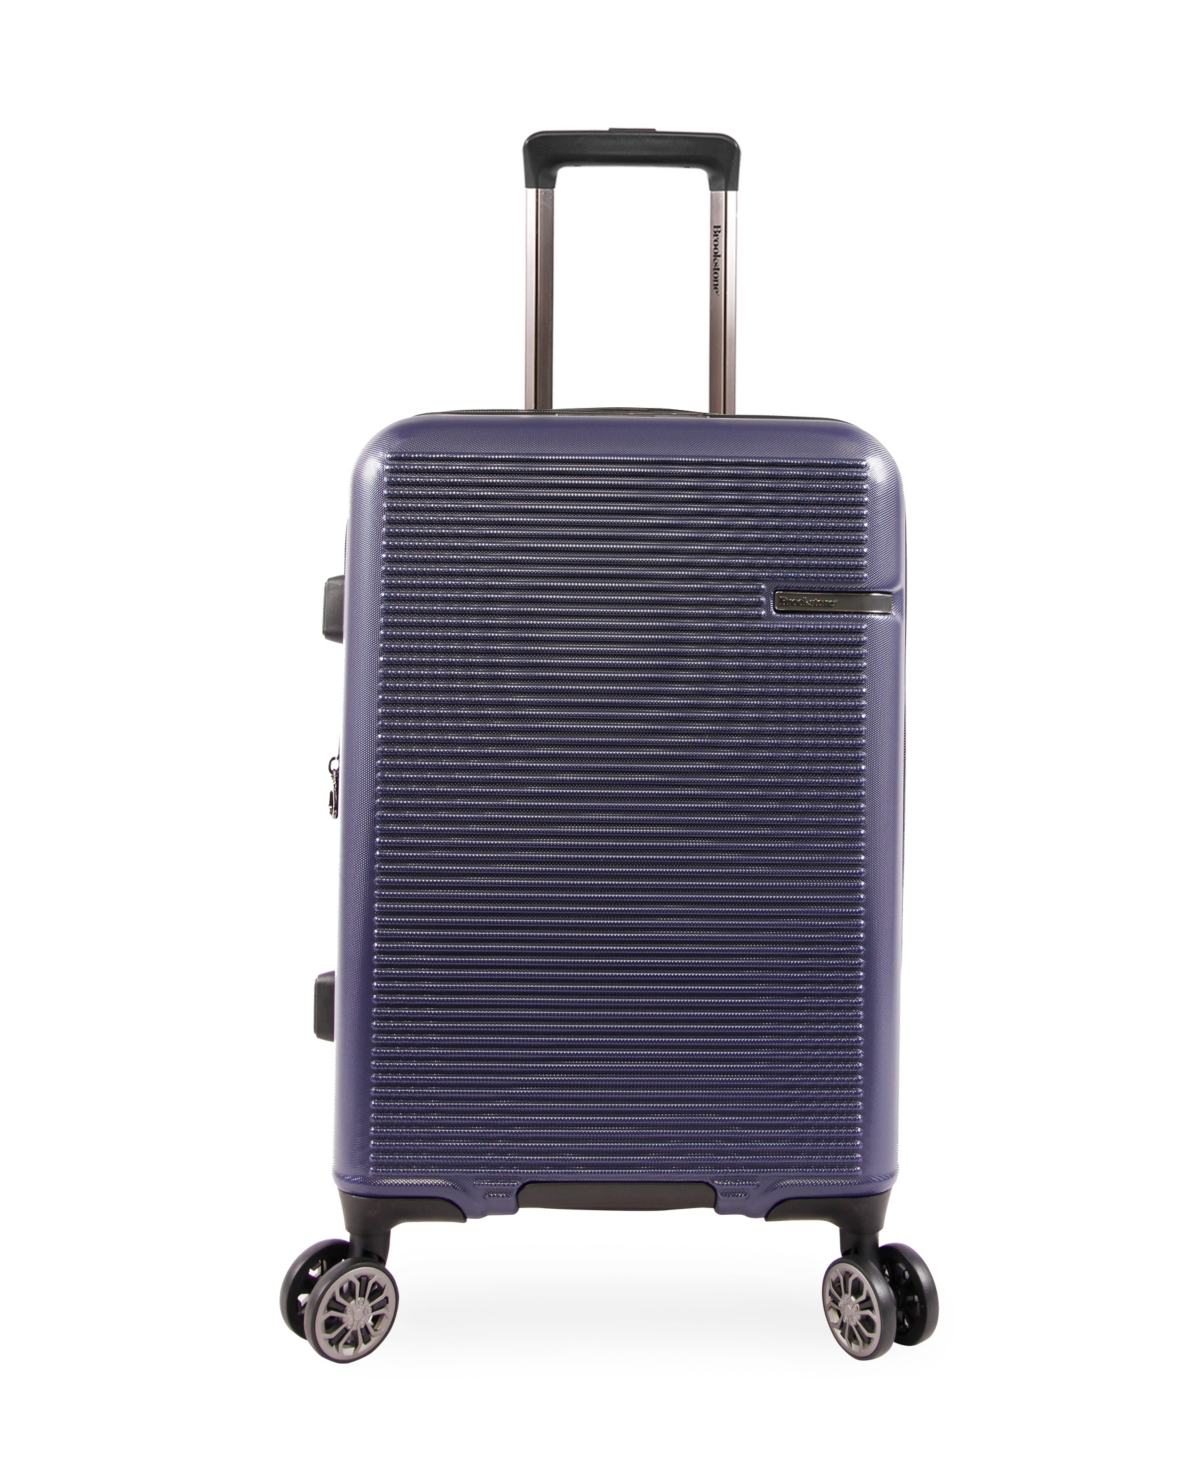 Nelson 21" Hardside Carry-On Luggage with Charging Port - Plum